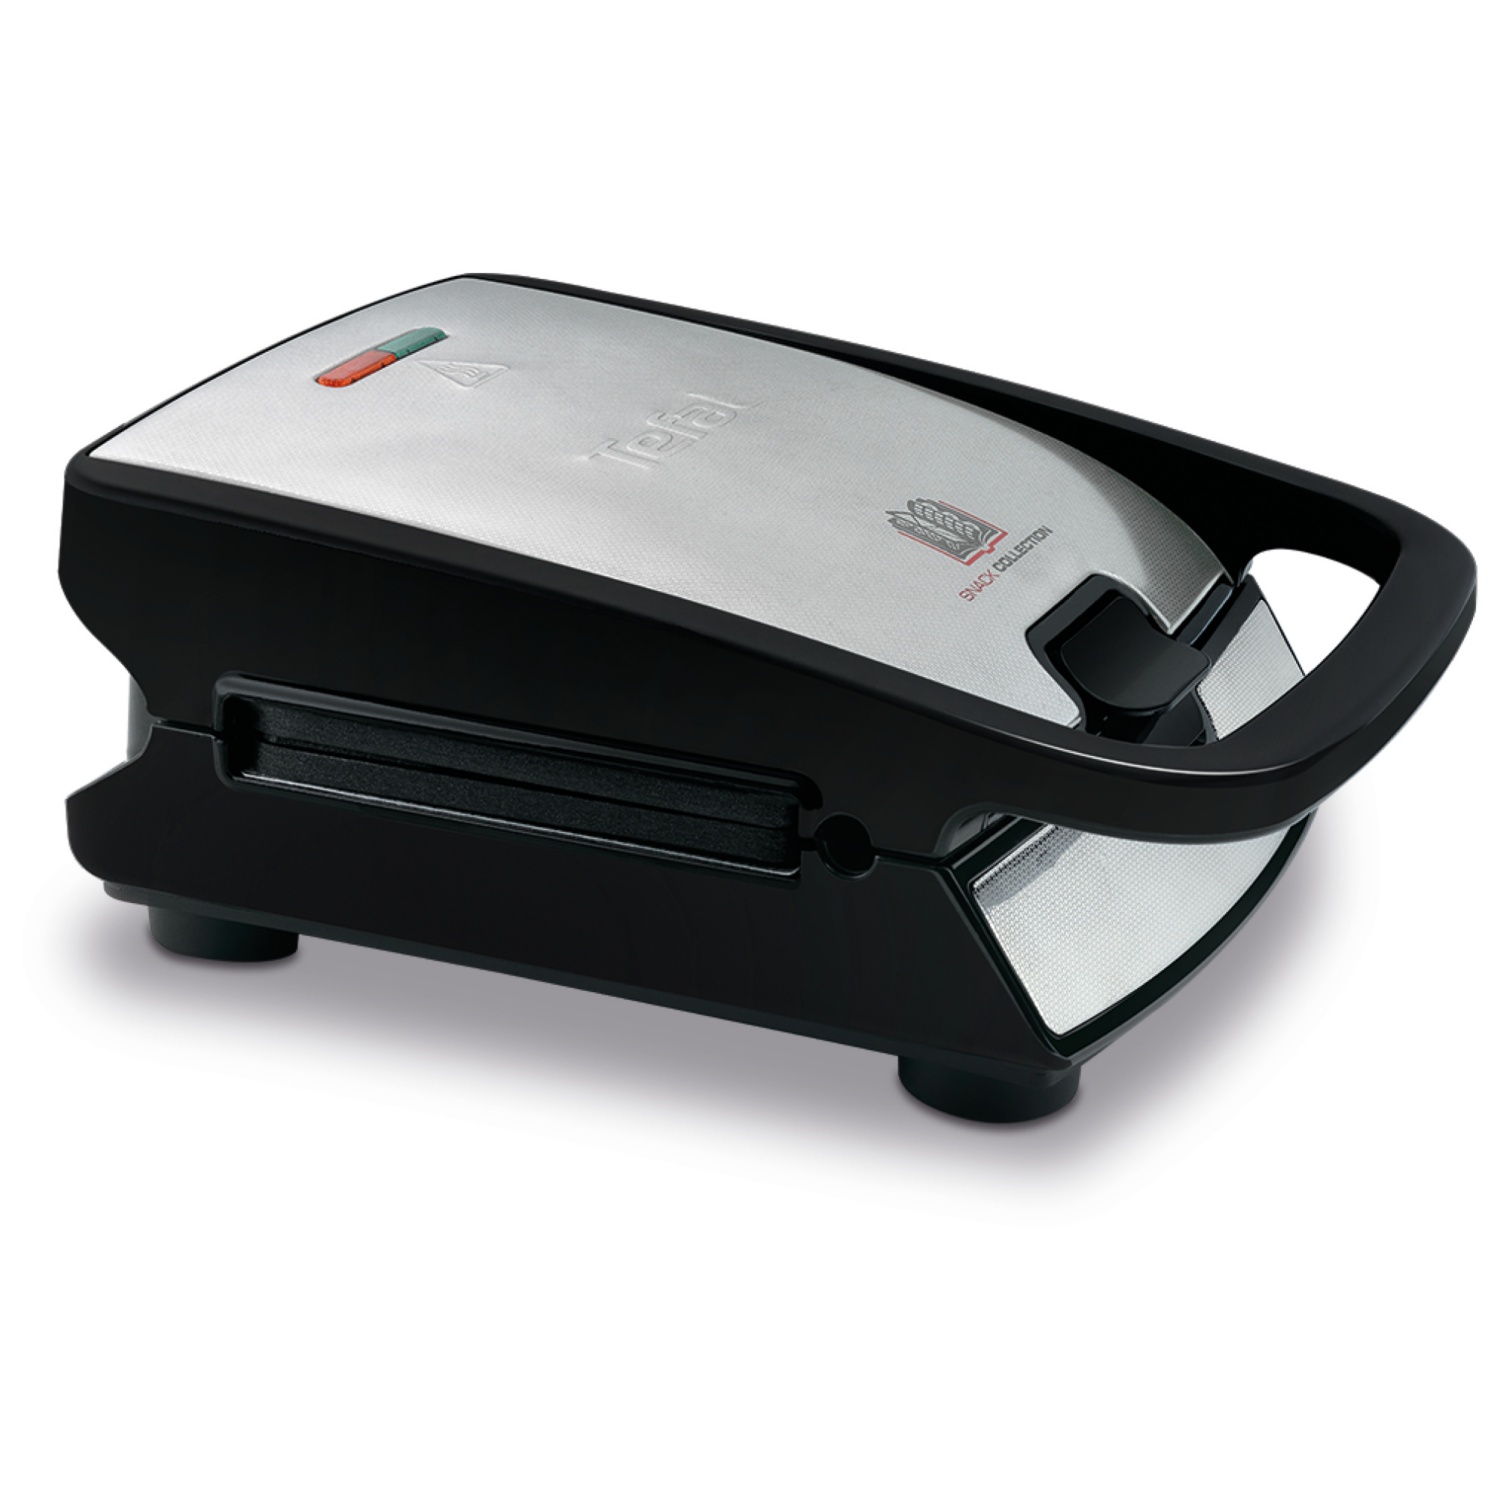 TEFAL Snack Collection SW857D12 Waffeleisen